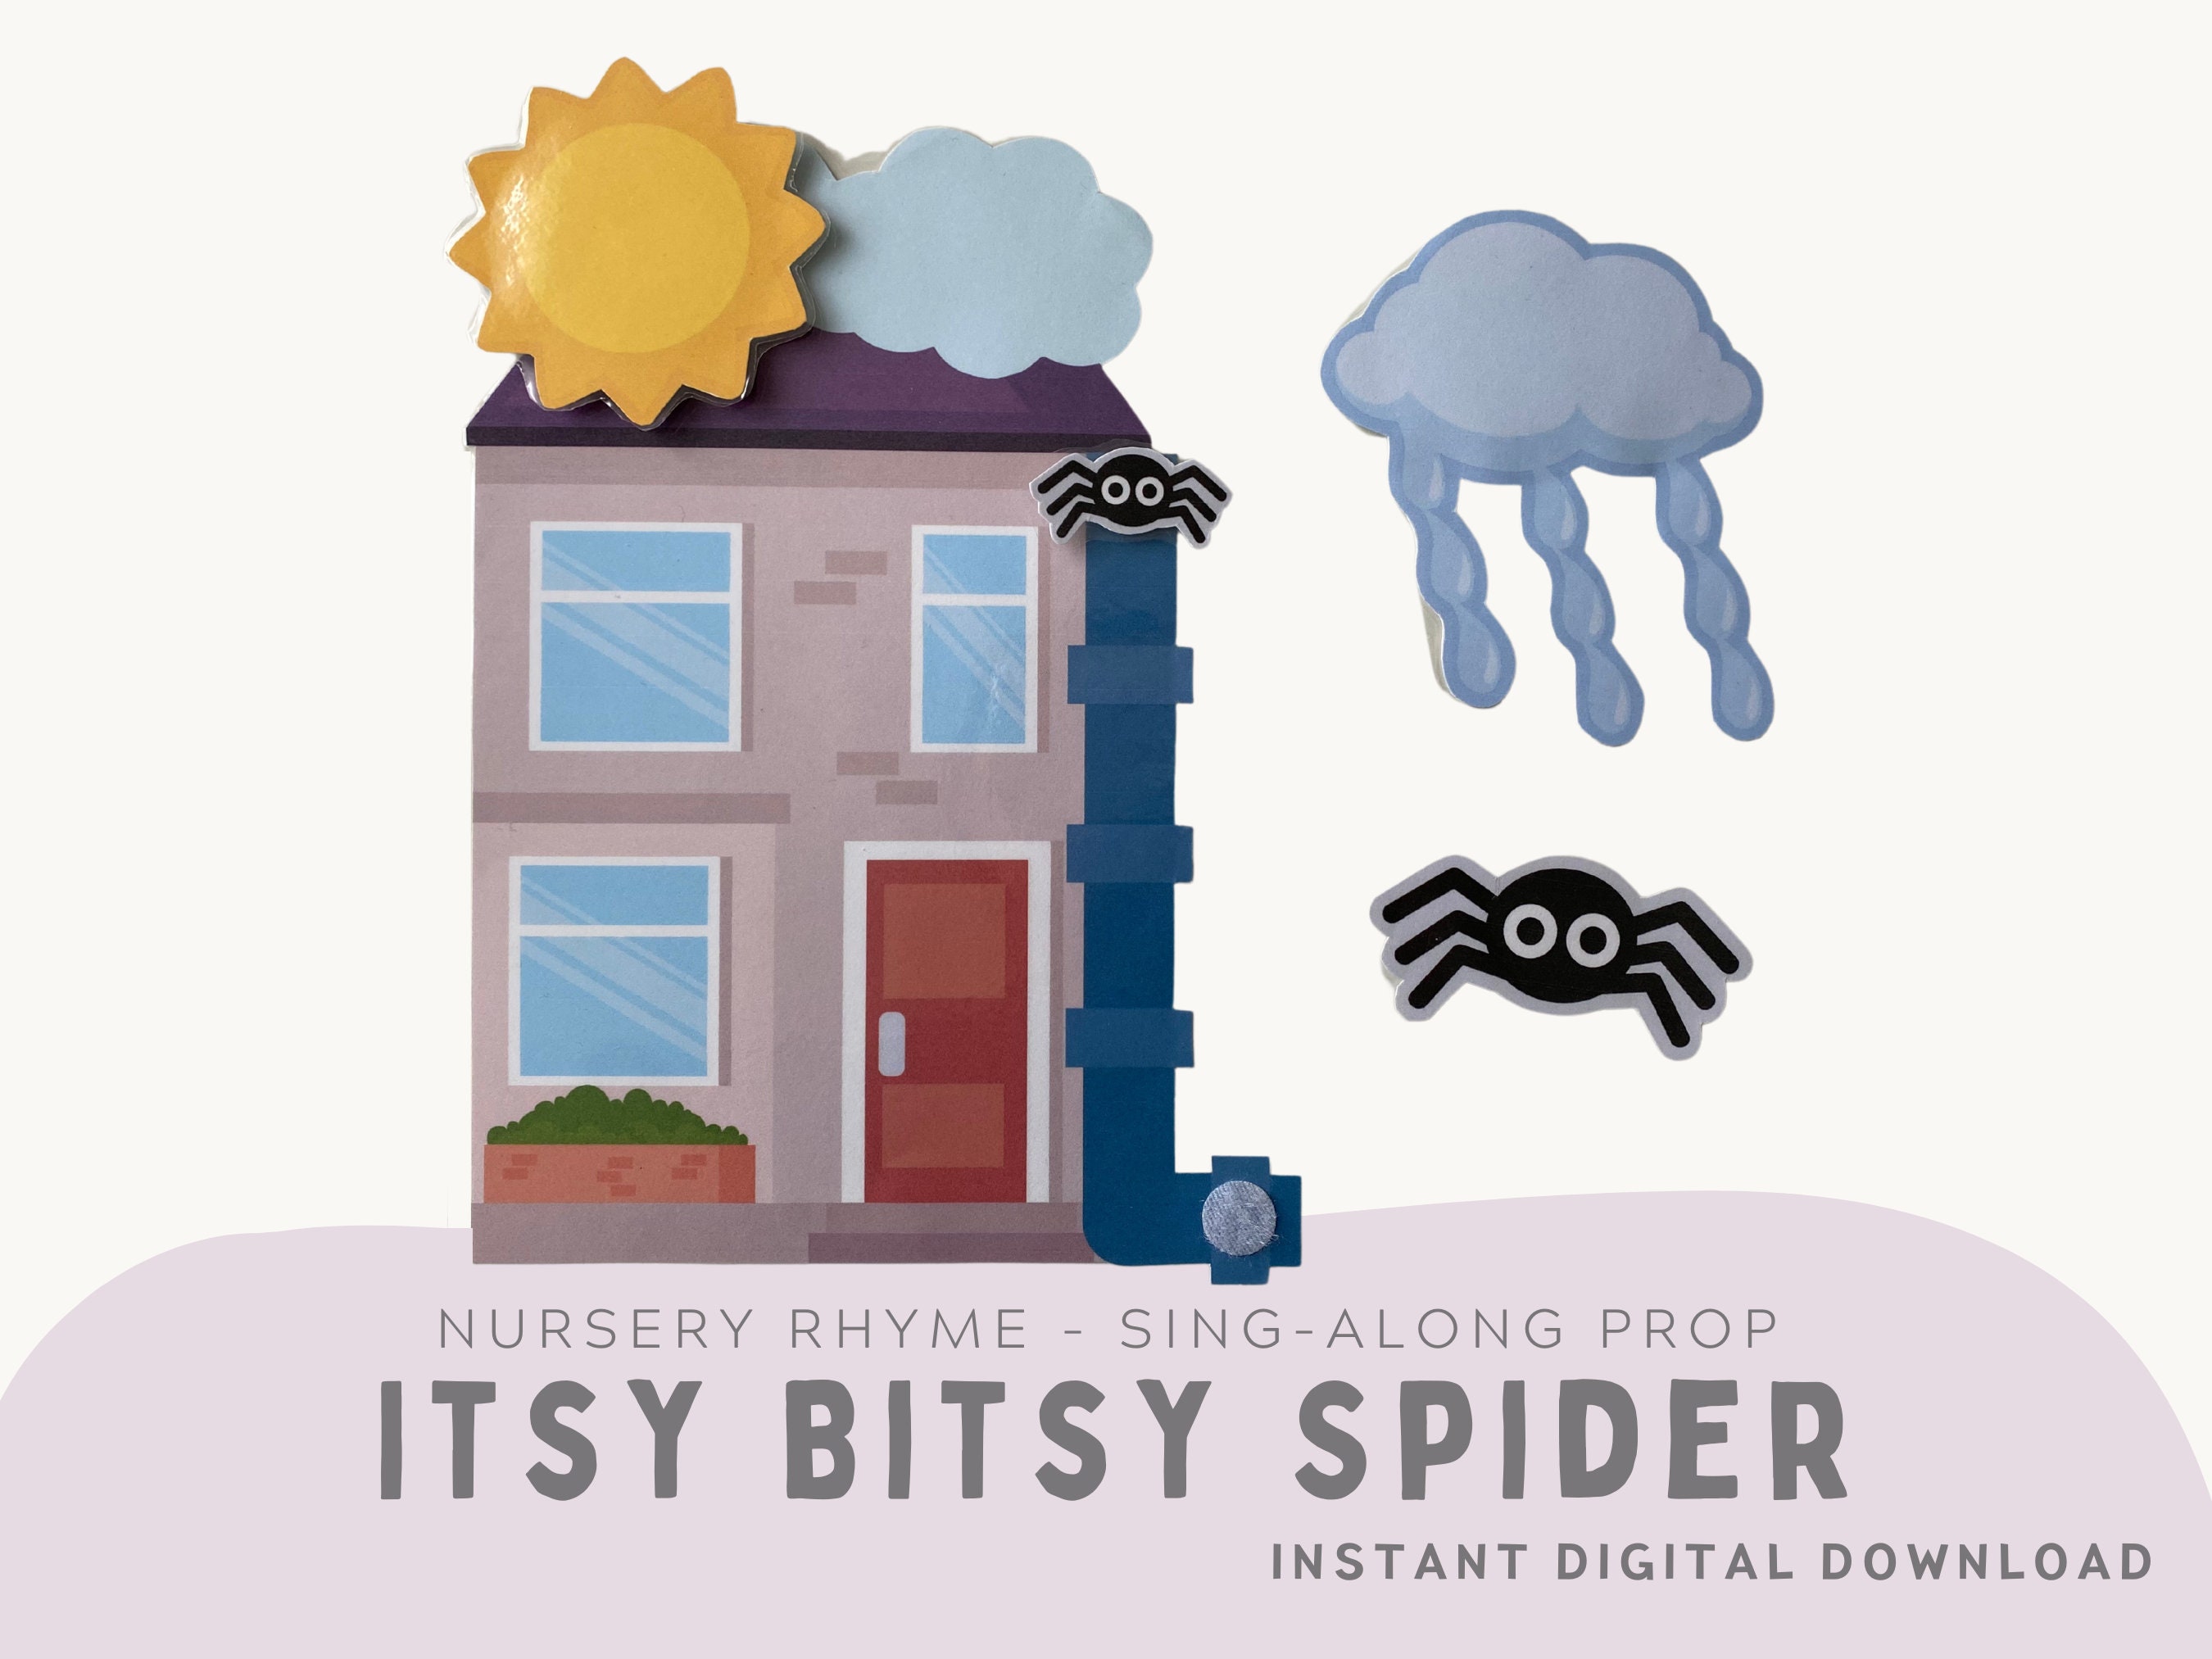 The Itsy Bitsy Spider: Sing Along With Me!